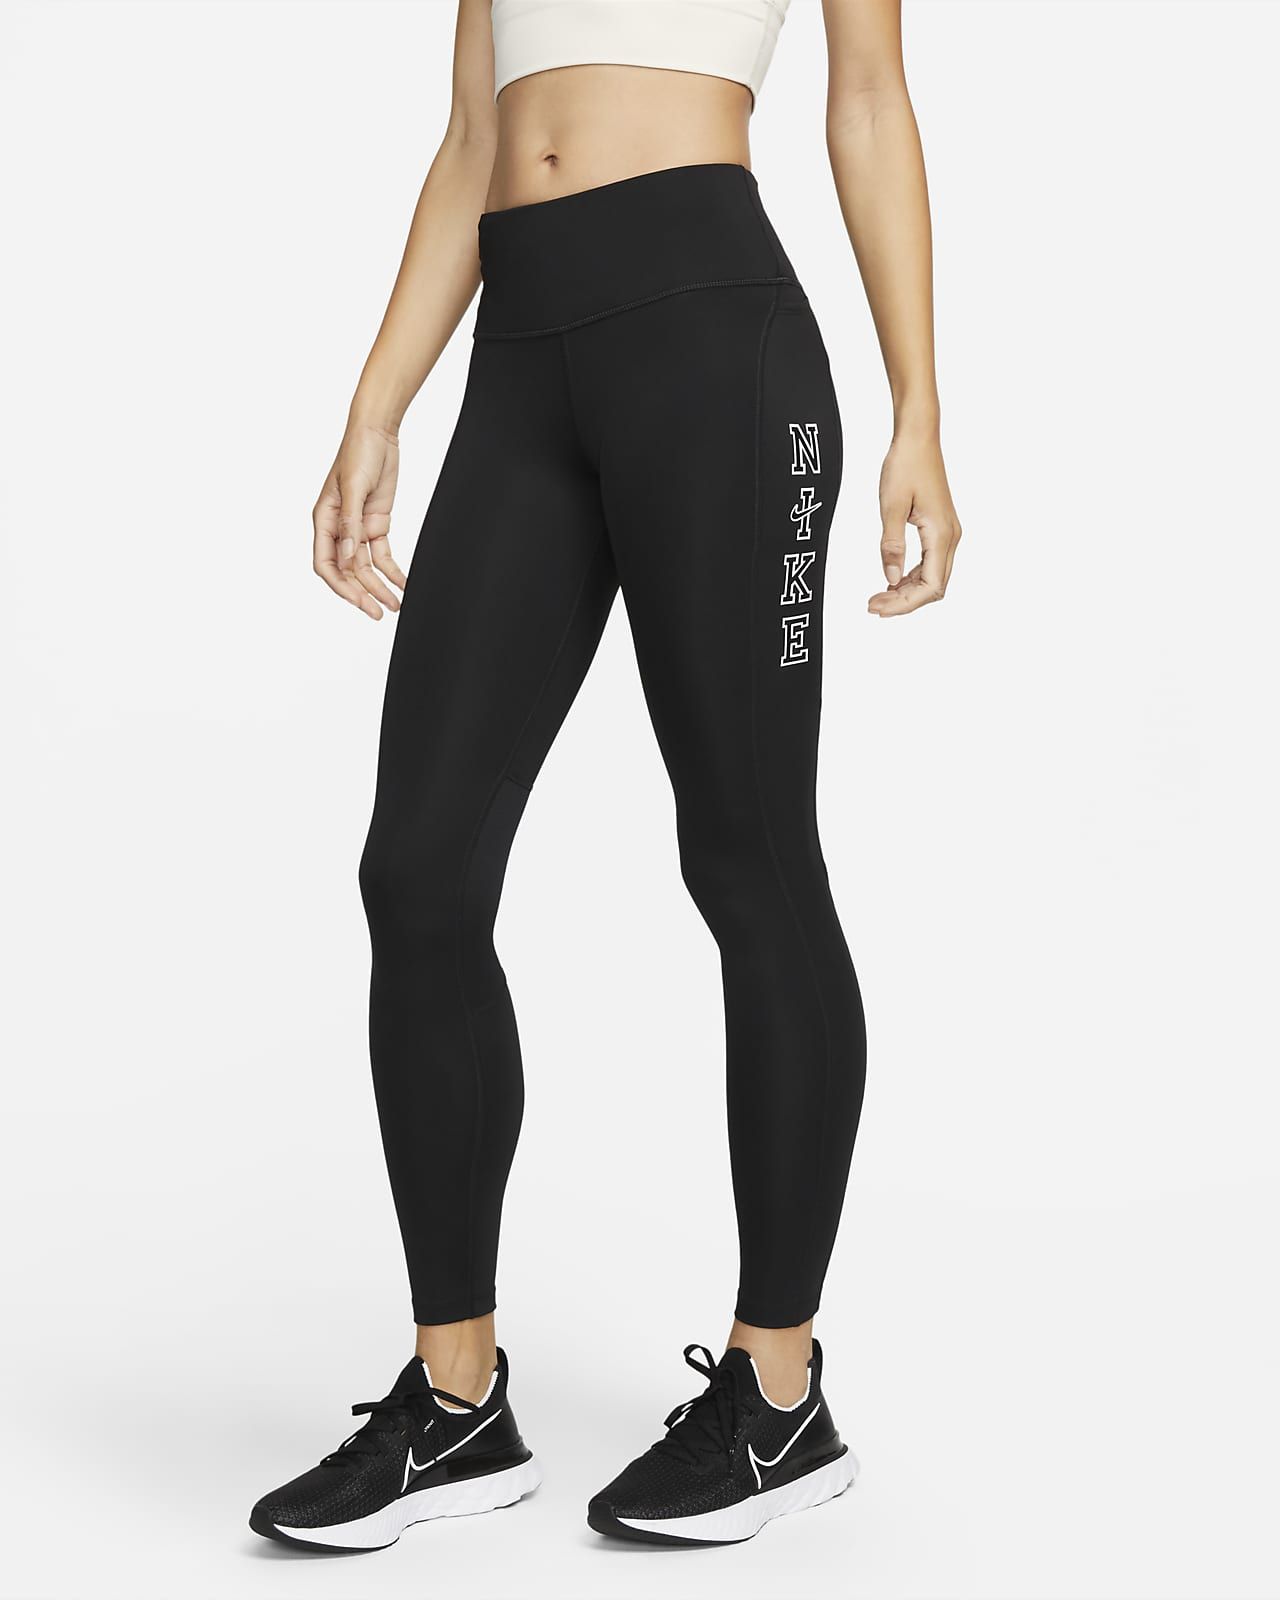 Women's Mid-Rise 7/8 Leggings with Pockets | Nike (US)